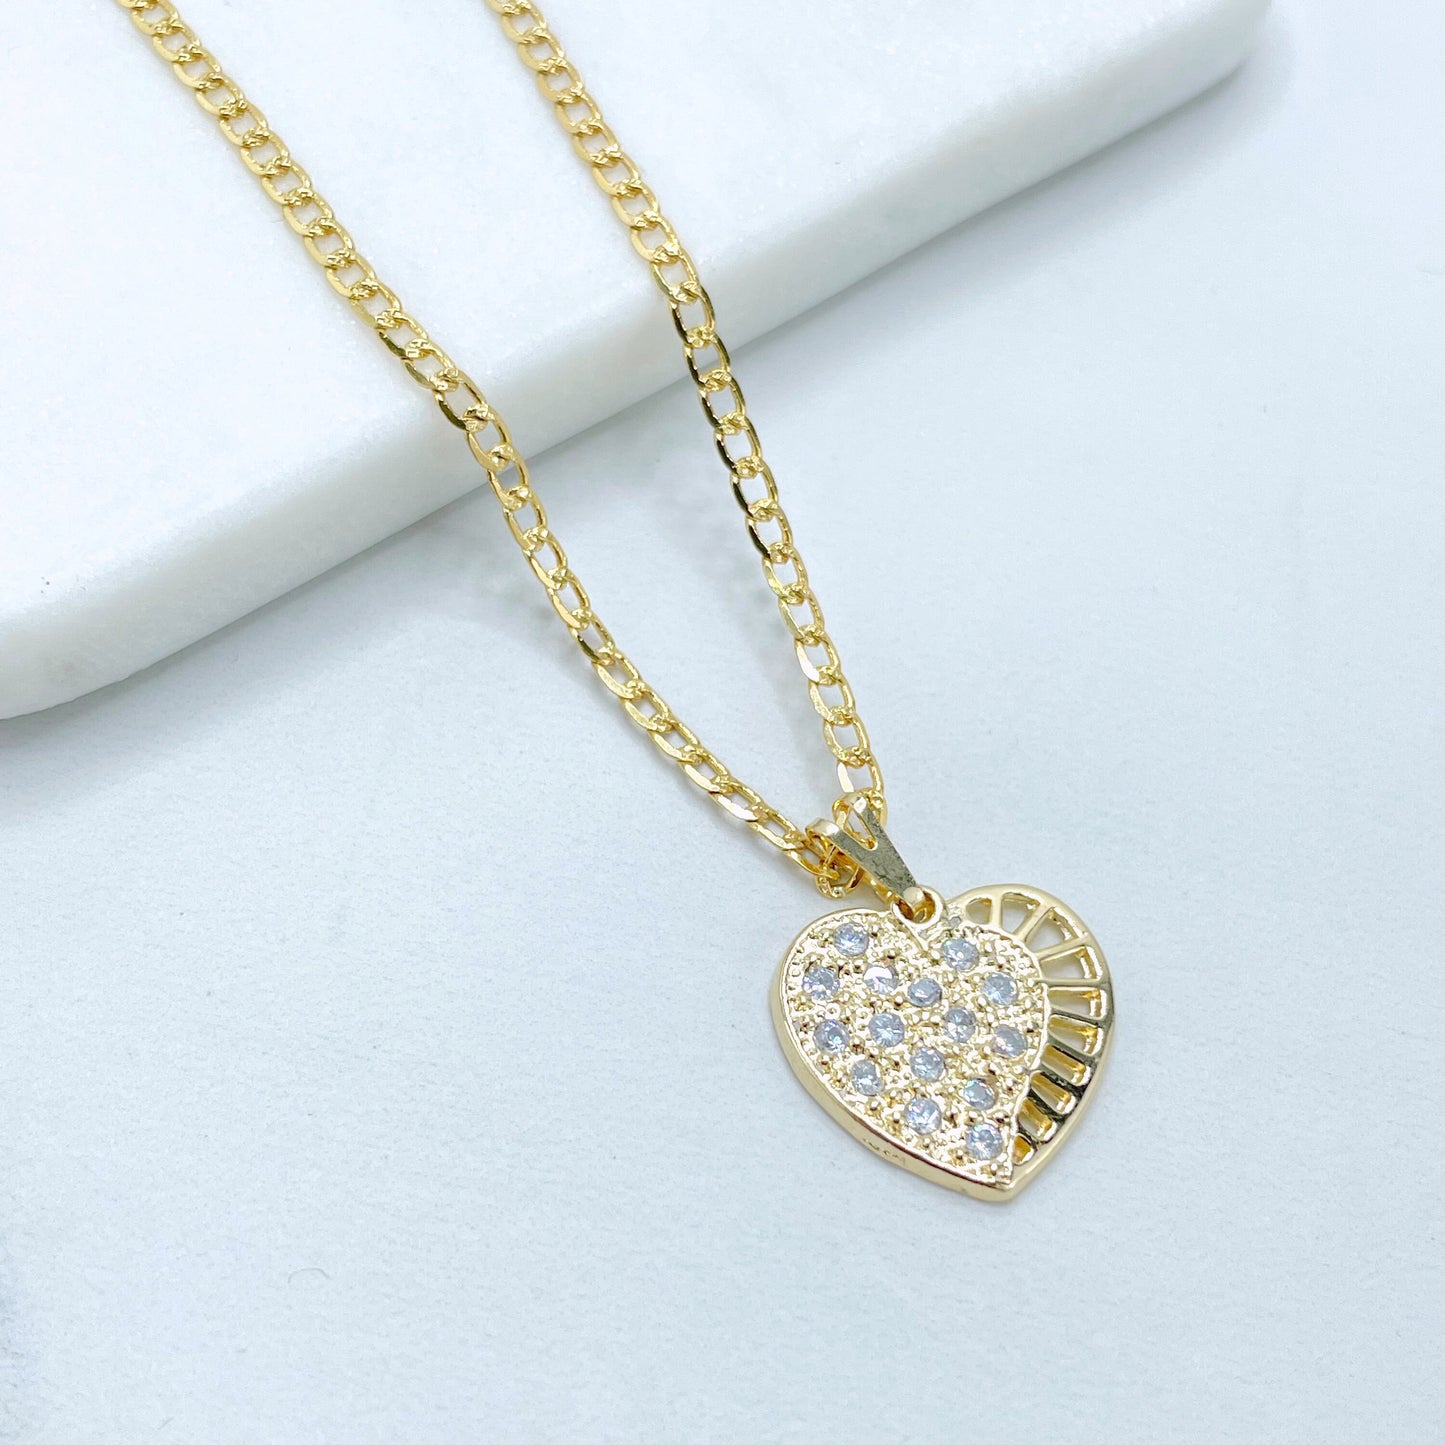 18k Gold Filled 2mm Curb Link Chain with Cubic Zirconia Heart Stud Earrings and Pendant Charms Set, Wholesale Jewelry Making Supplies